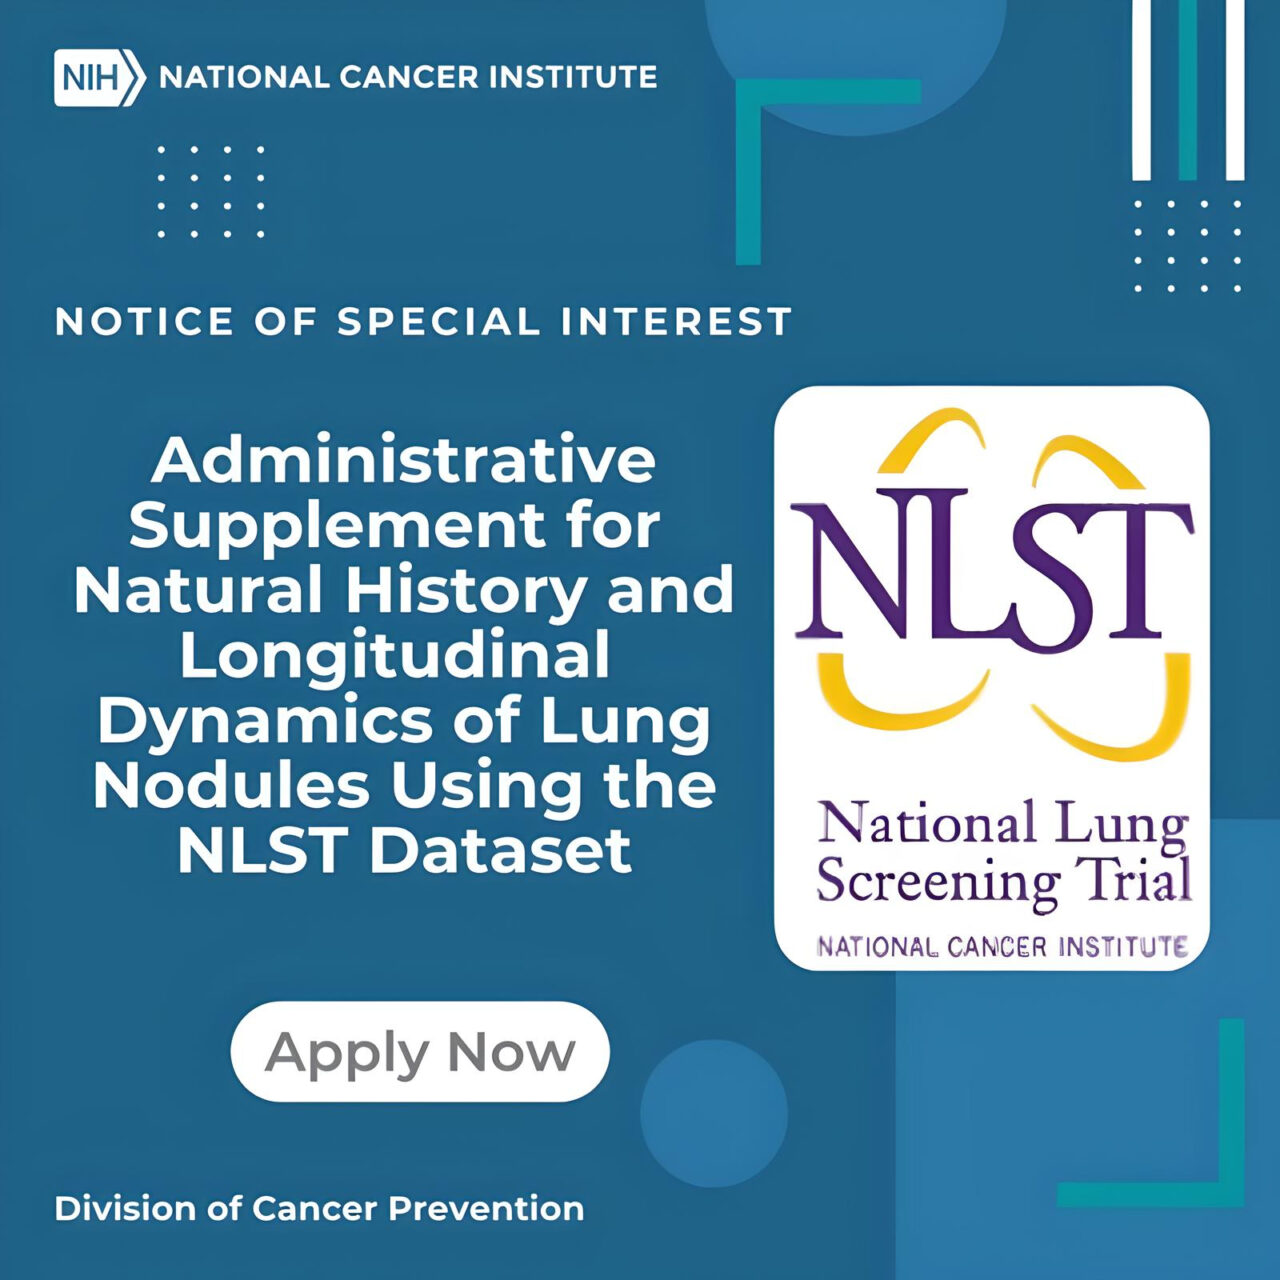 Administrative supplement for Natural History of Lung Nodules using the NLST Dataset